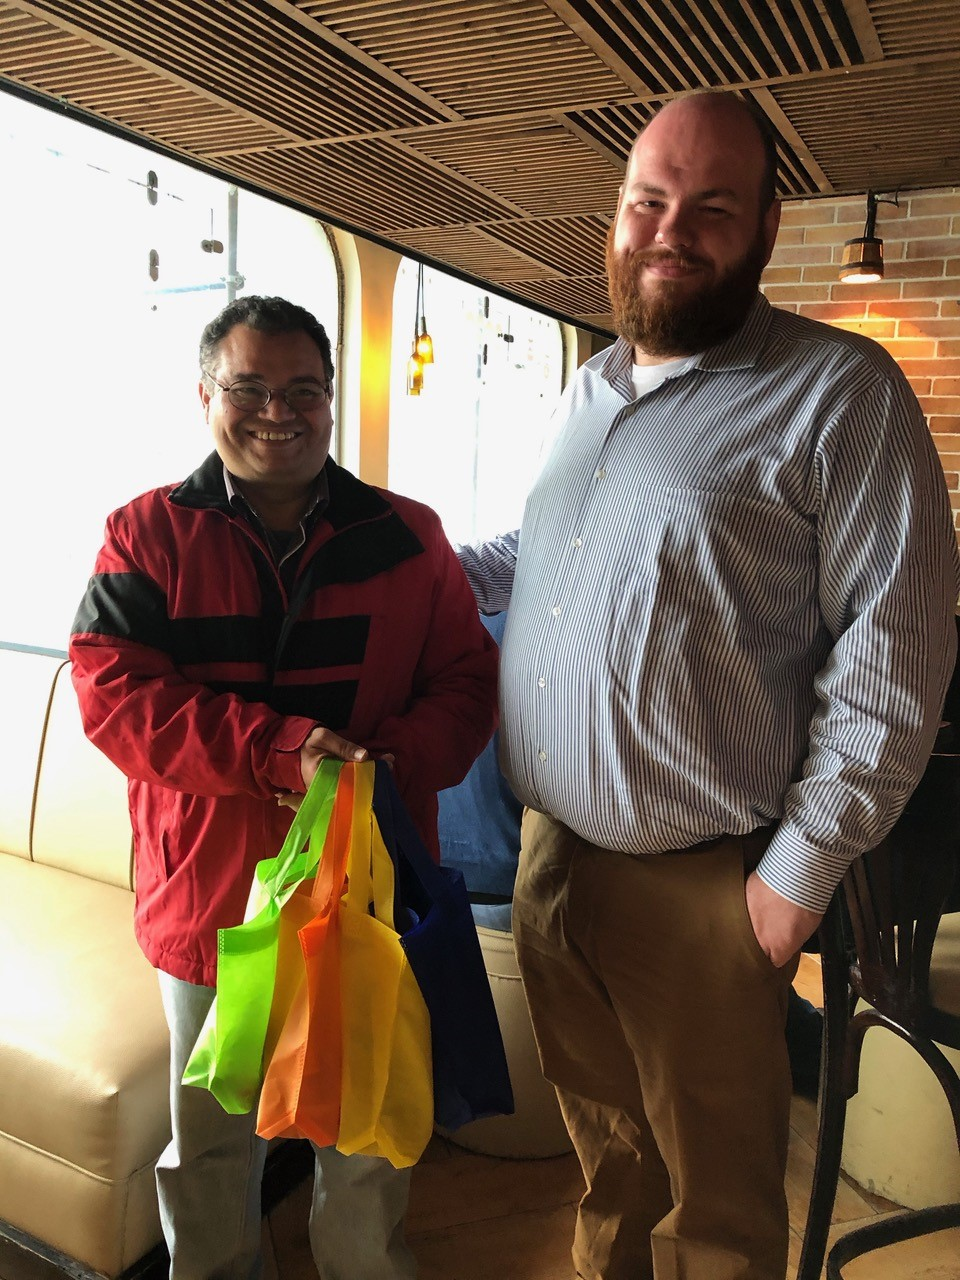  Ken presents Pastor Ibrahim with bags of small gifts for Abou Soliman Fellowship's children’s ministry 